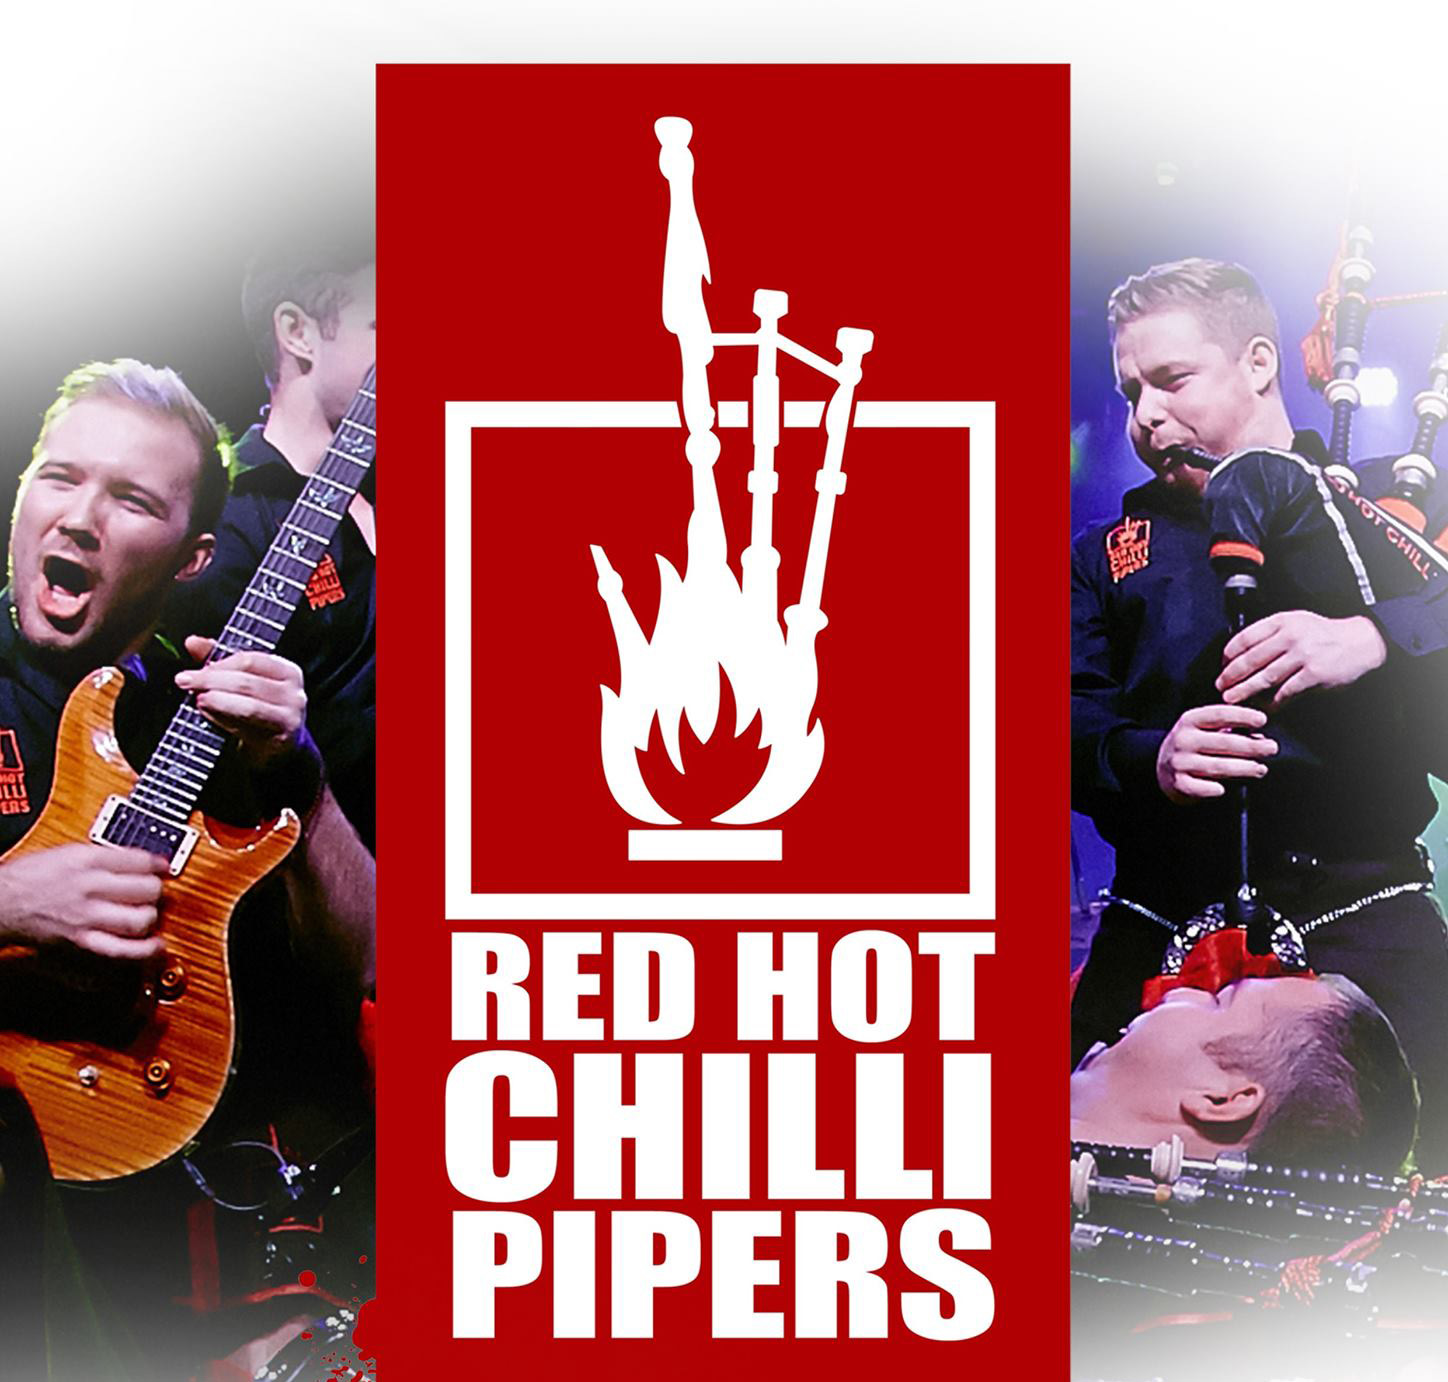 RED HOT CHILLI PIPERS announce 20th Anniversary World Tour show at The Waterfront Hall, Belfast Saturday 19th Feb 2022 